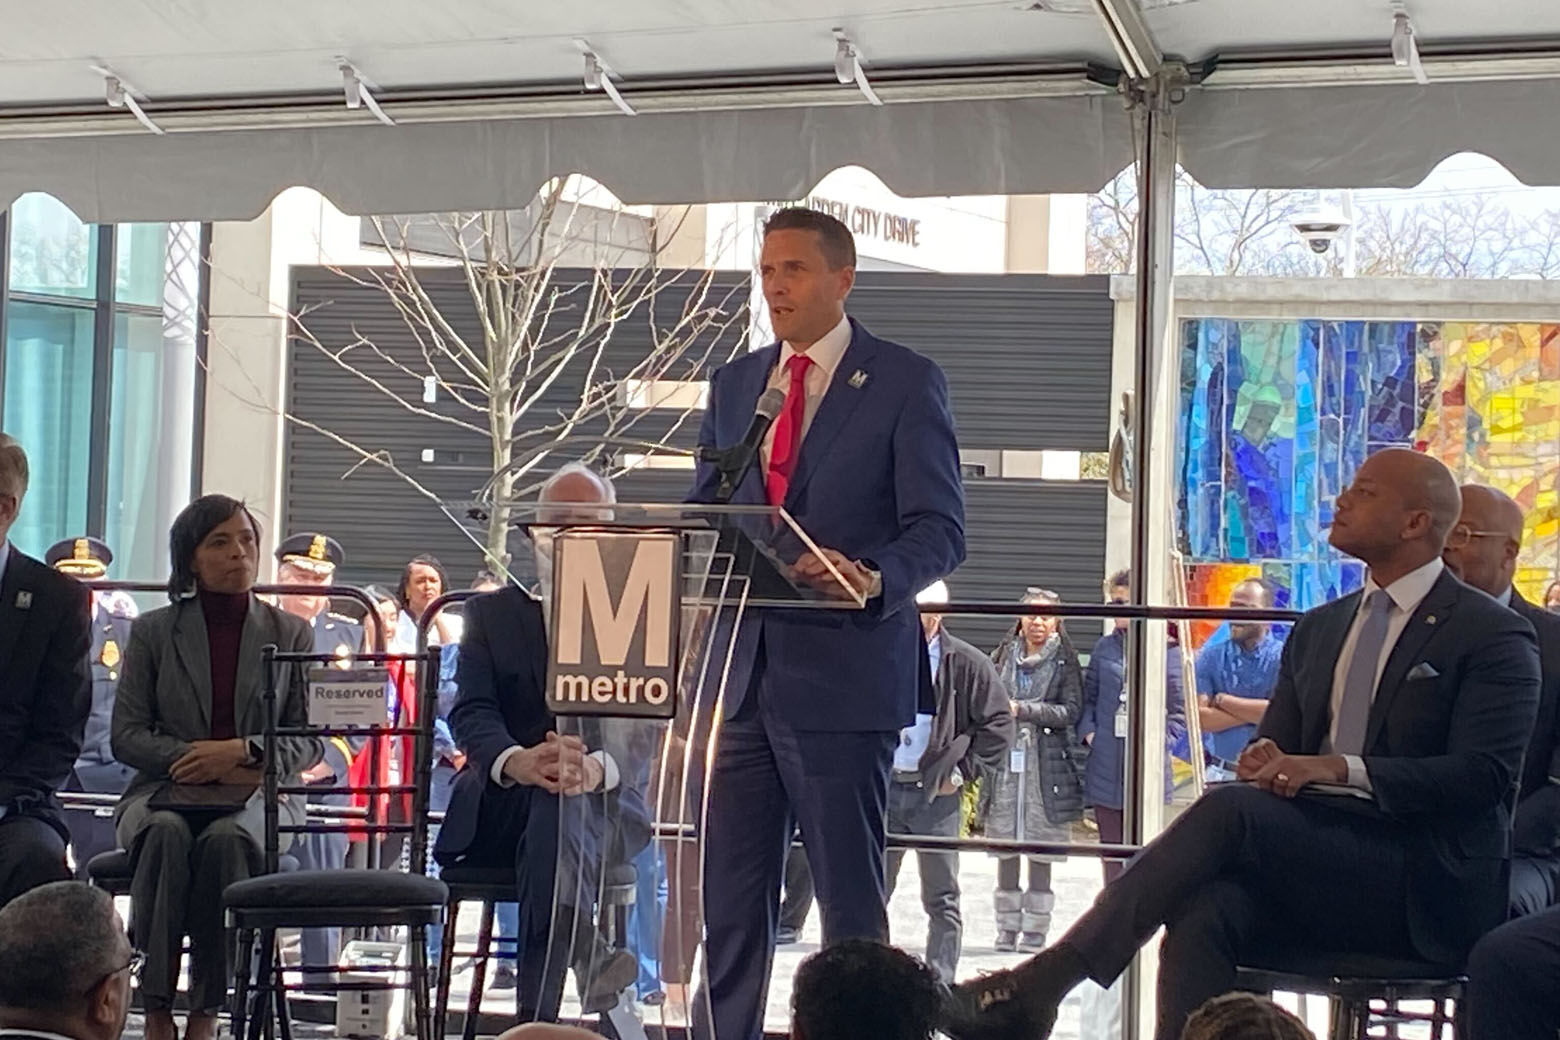 Metro General Manager Randy Clarke speaking at the celebration of the department's headquarters in New Carrollton Tuesday, March 21, 2023.